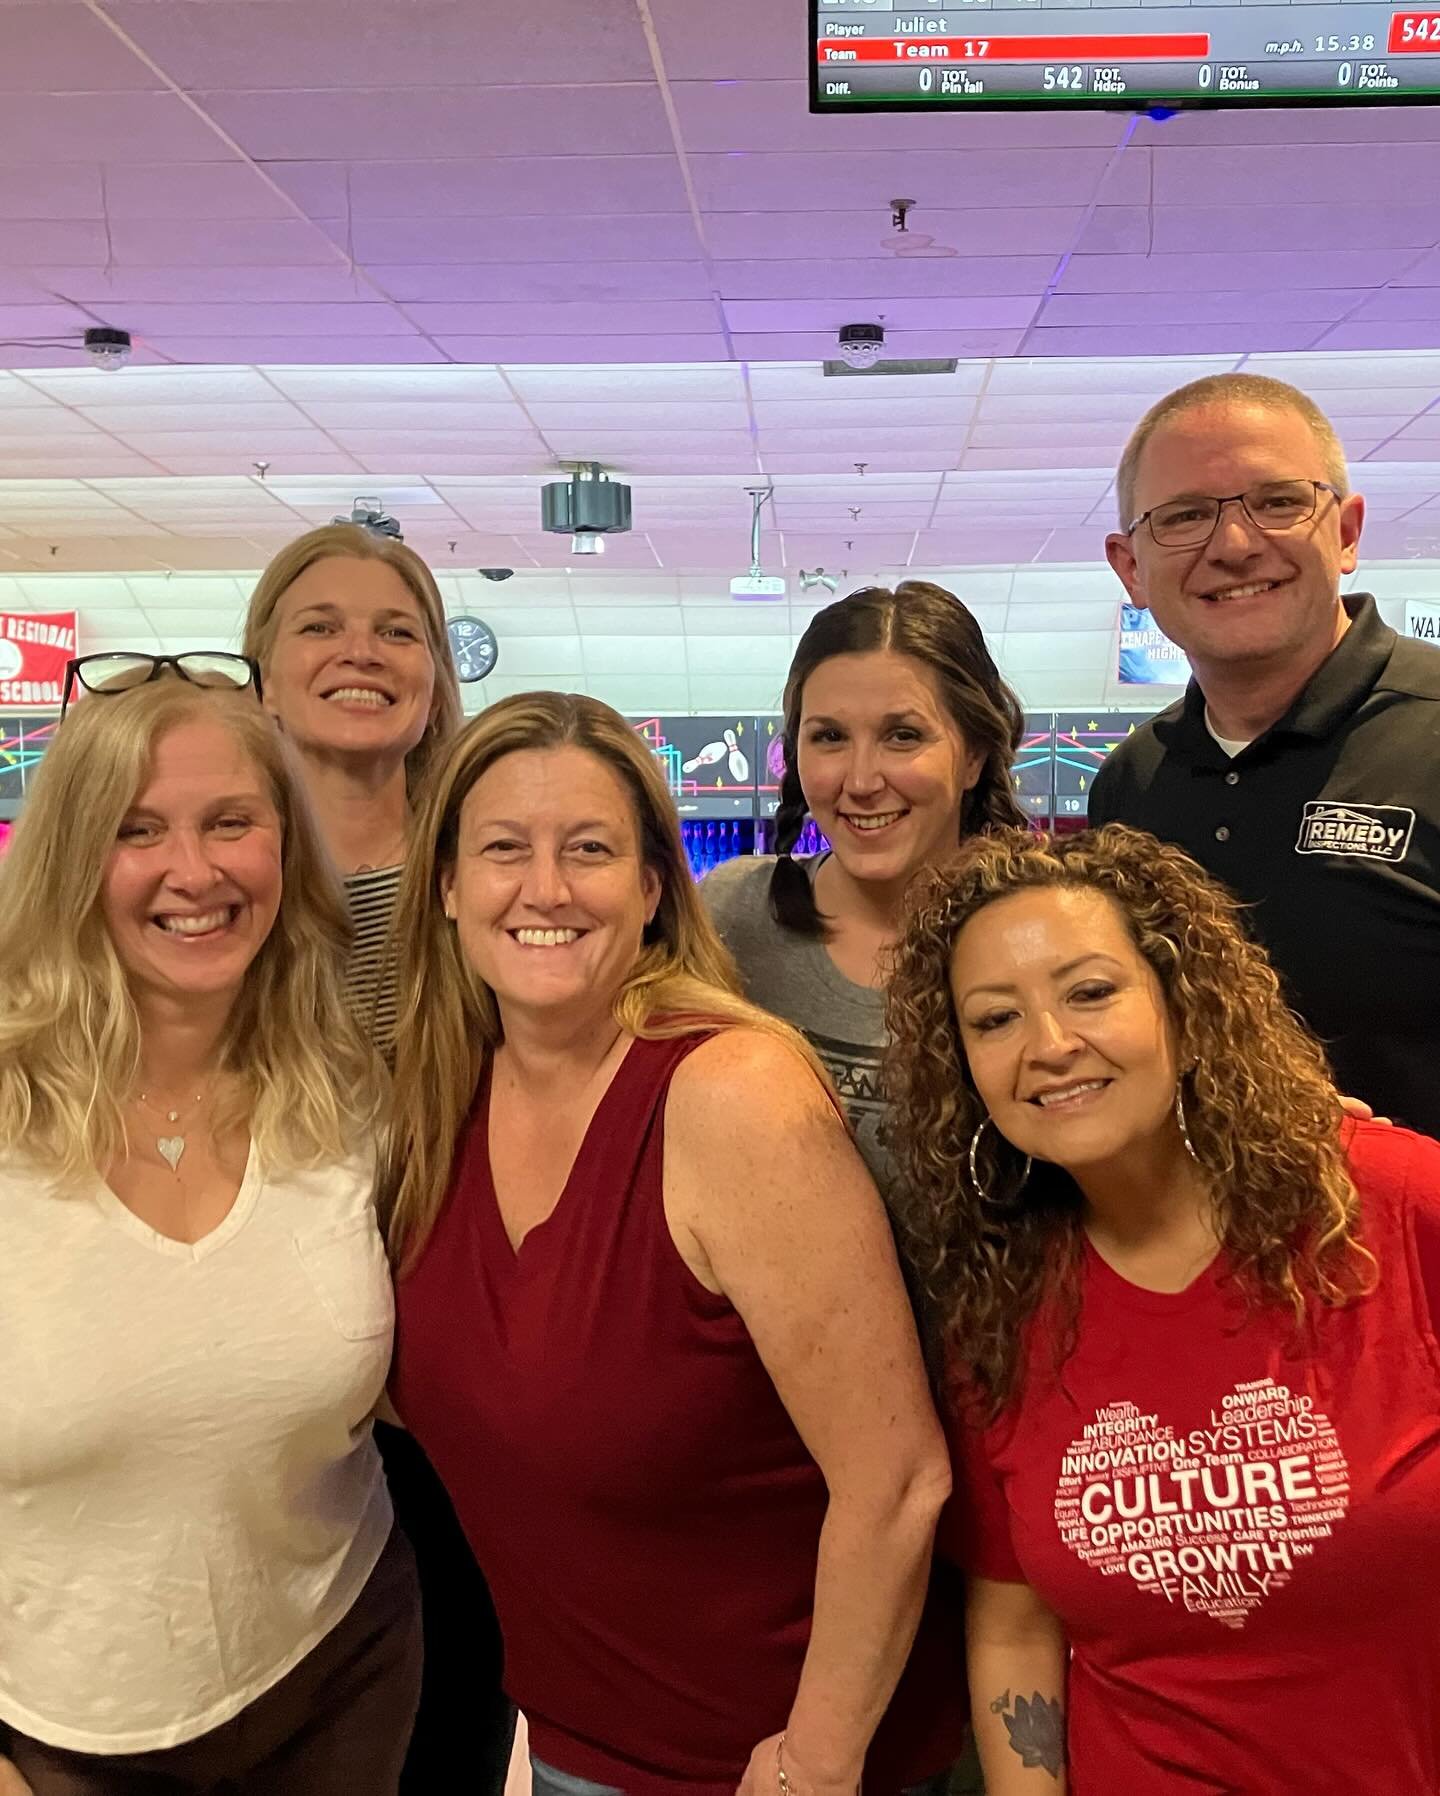 Split happens! Had fun bowling with the Keller Williams Integrity team through SCARNJ. Did we win? Nope. Did we laugh and make new friends? Yup!
#homeinspection #realestateinspection #homeinspector #newjersey